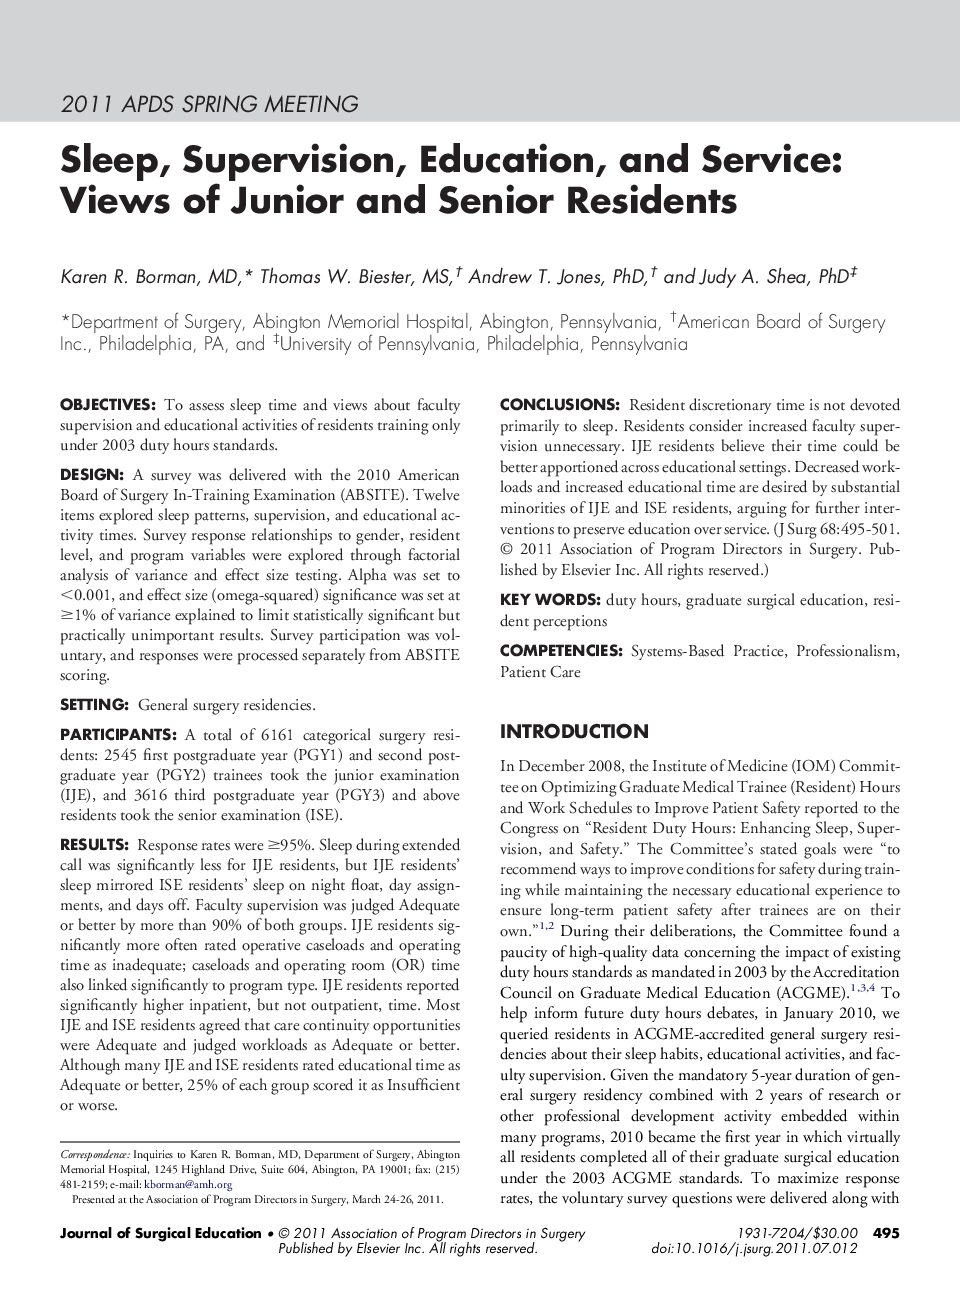 Sleep, Supervision, Education, and Service: Views of Junior and Senior Residents